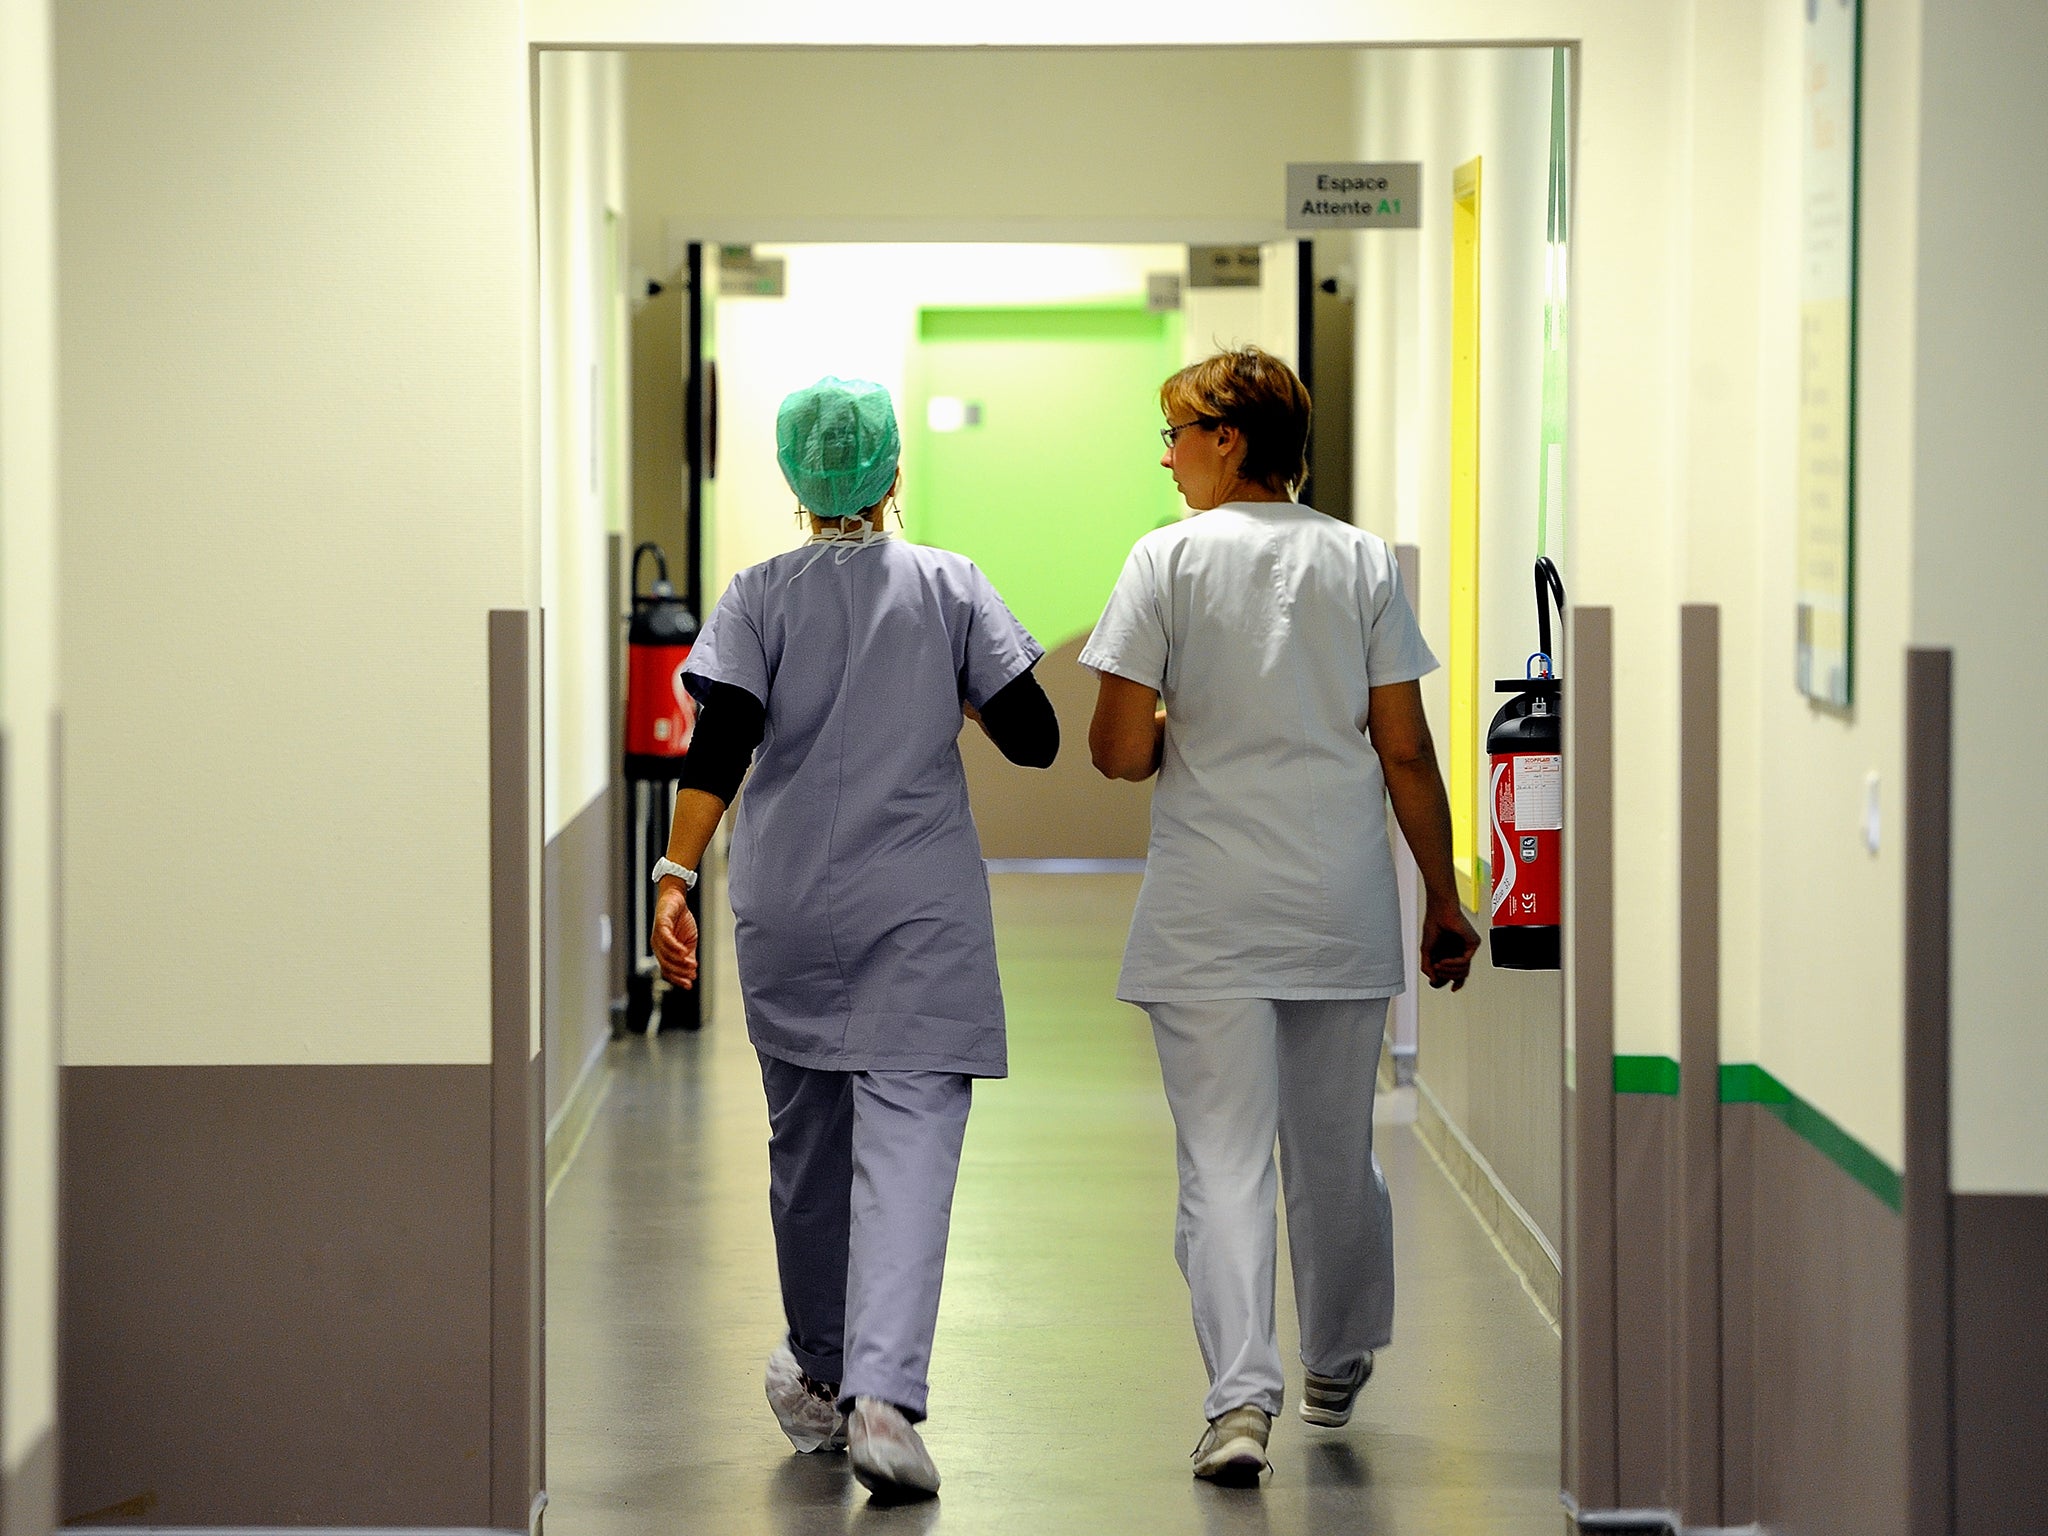 Patients who want to be treated in France will be asked to pay their own travel costs